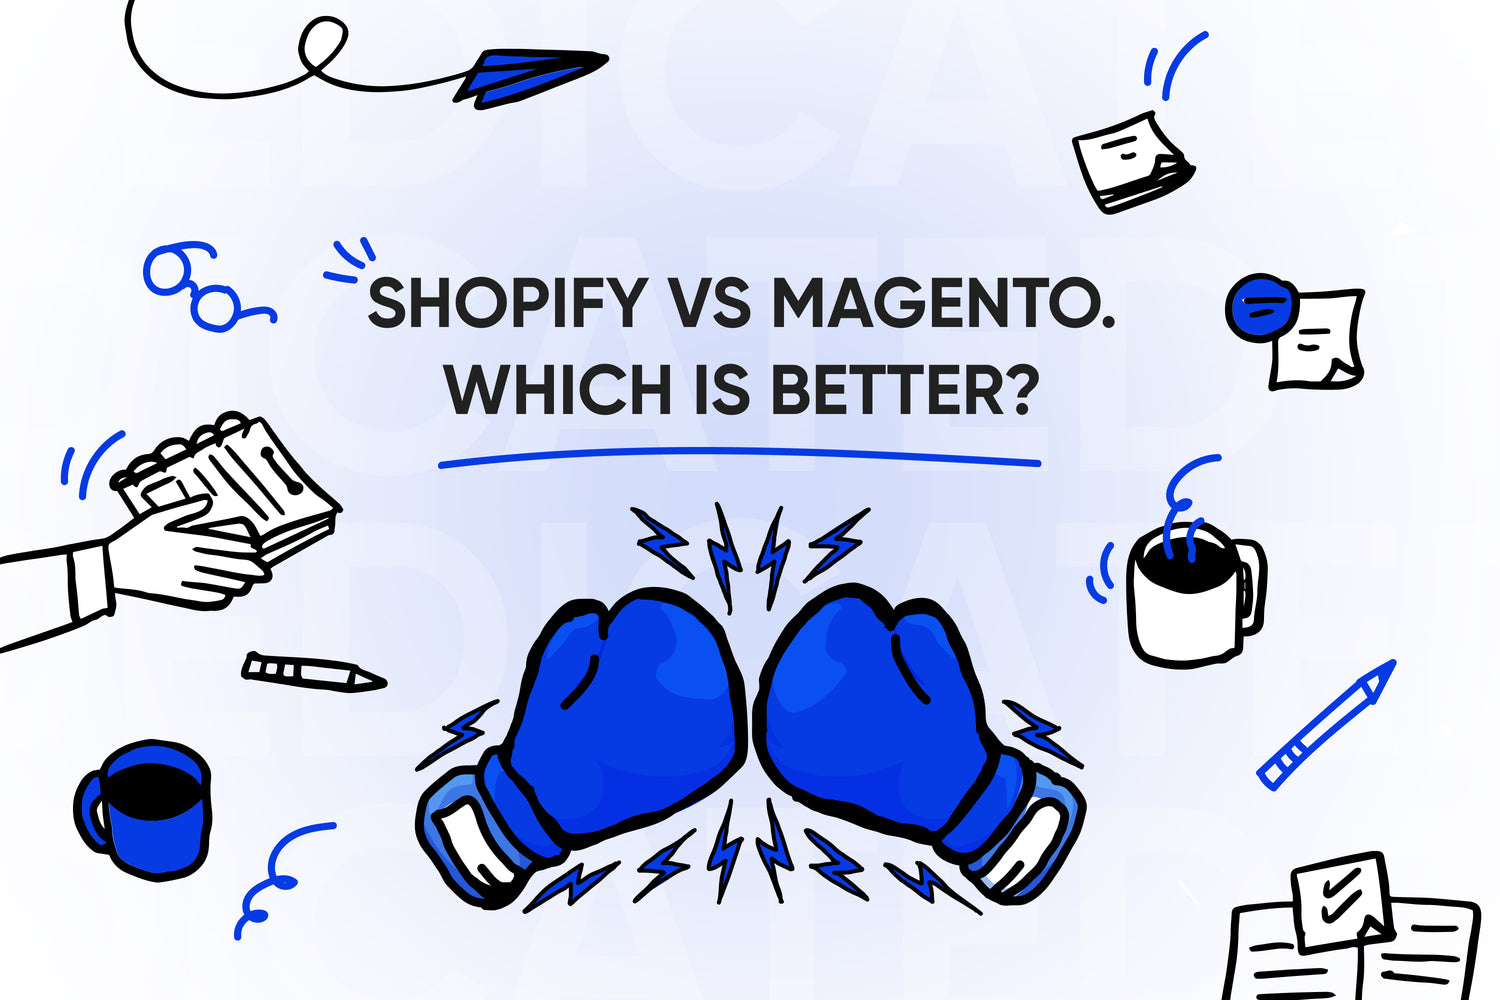 Shopify vs Magento. Which is better?